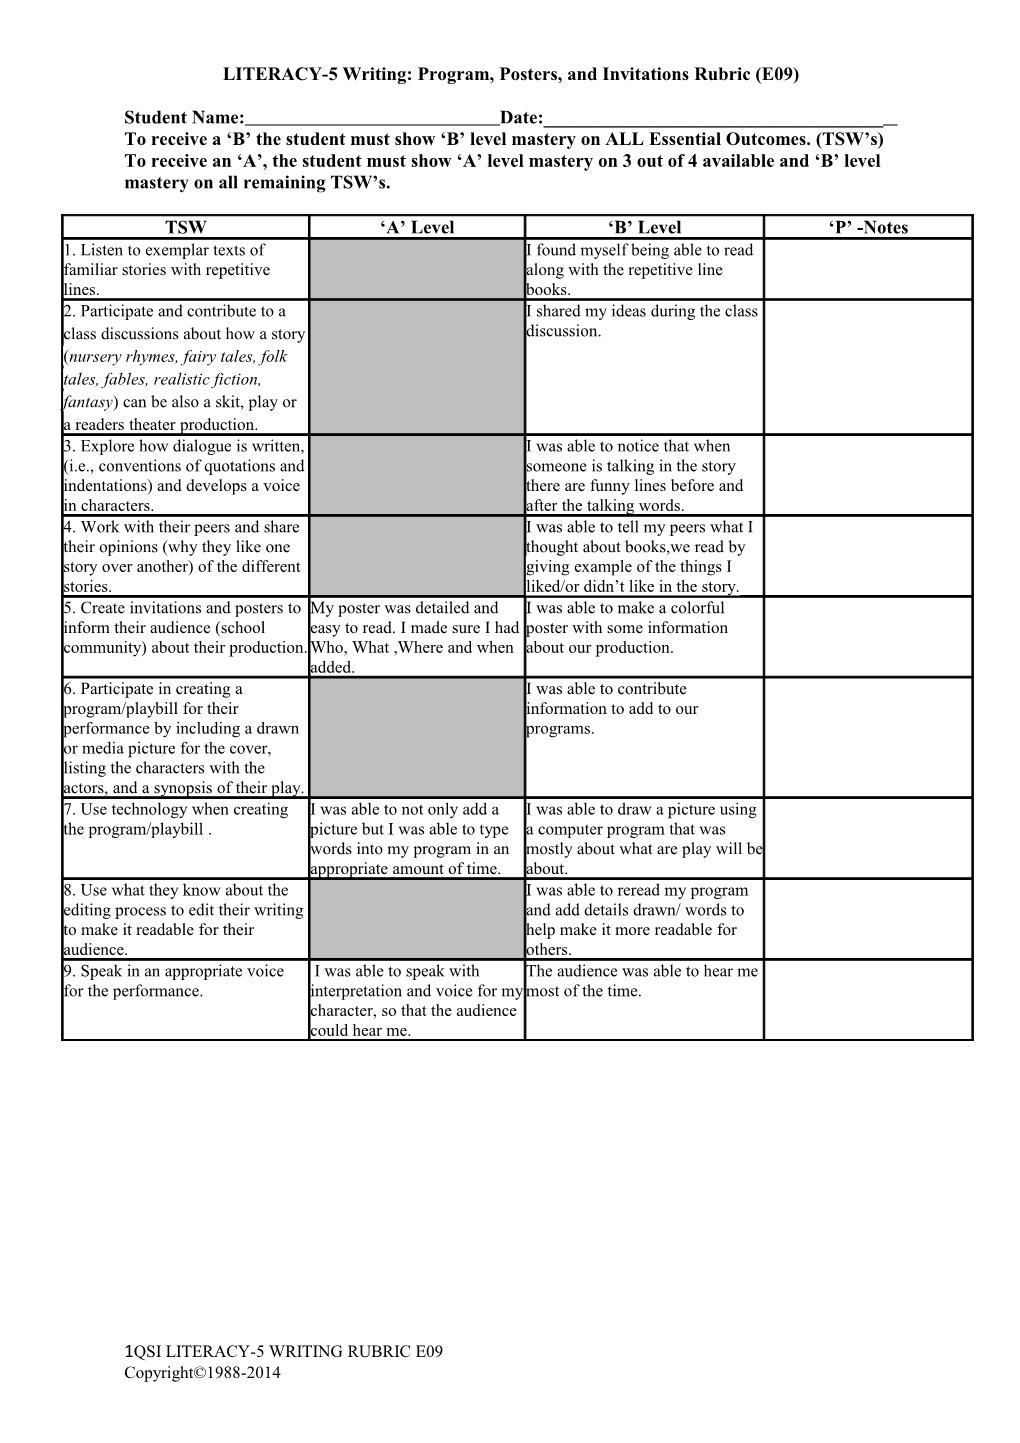 Writing Rubric5- E09 Program, Posters, and Invitations